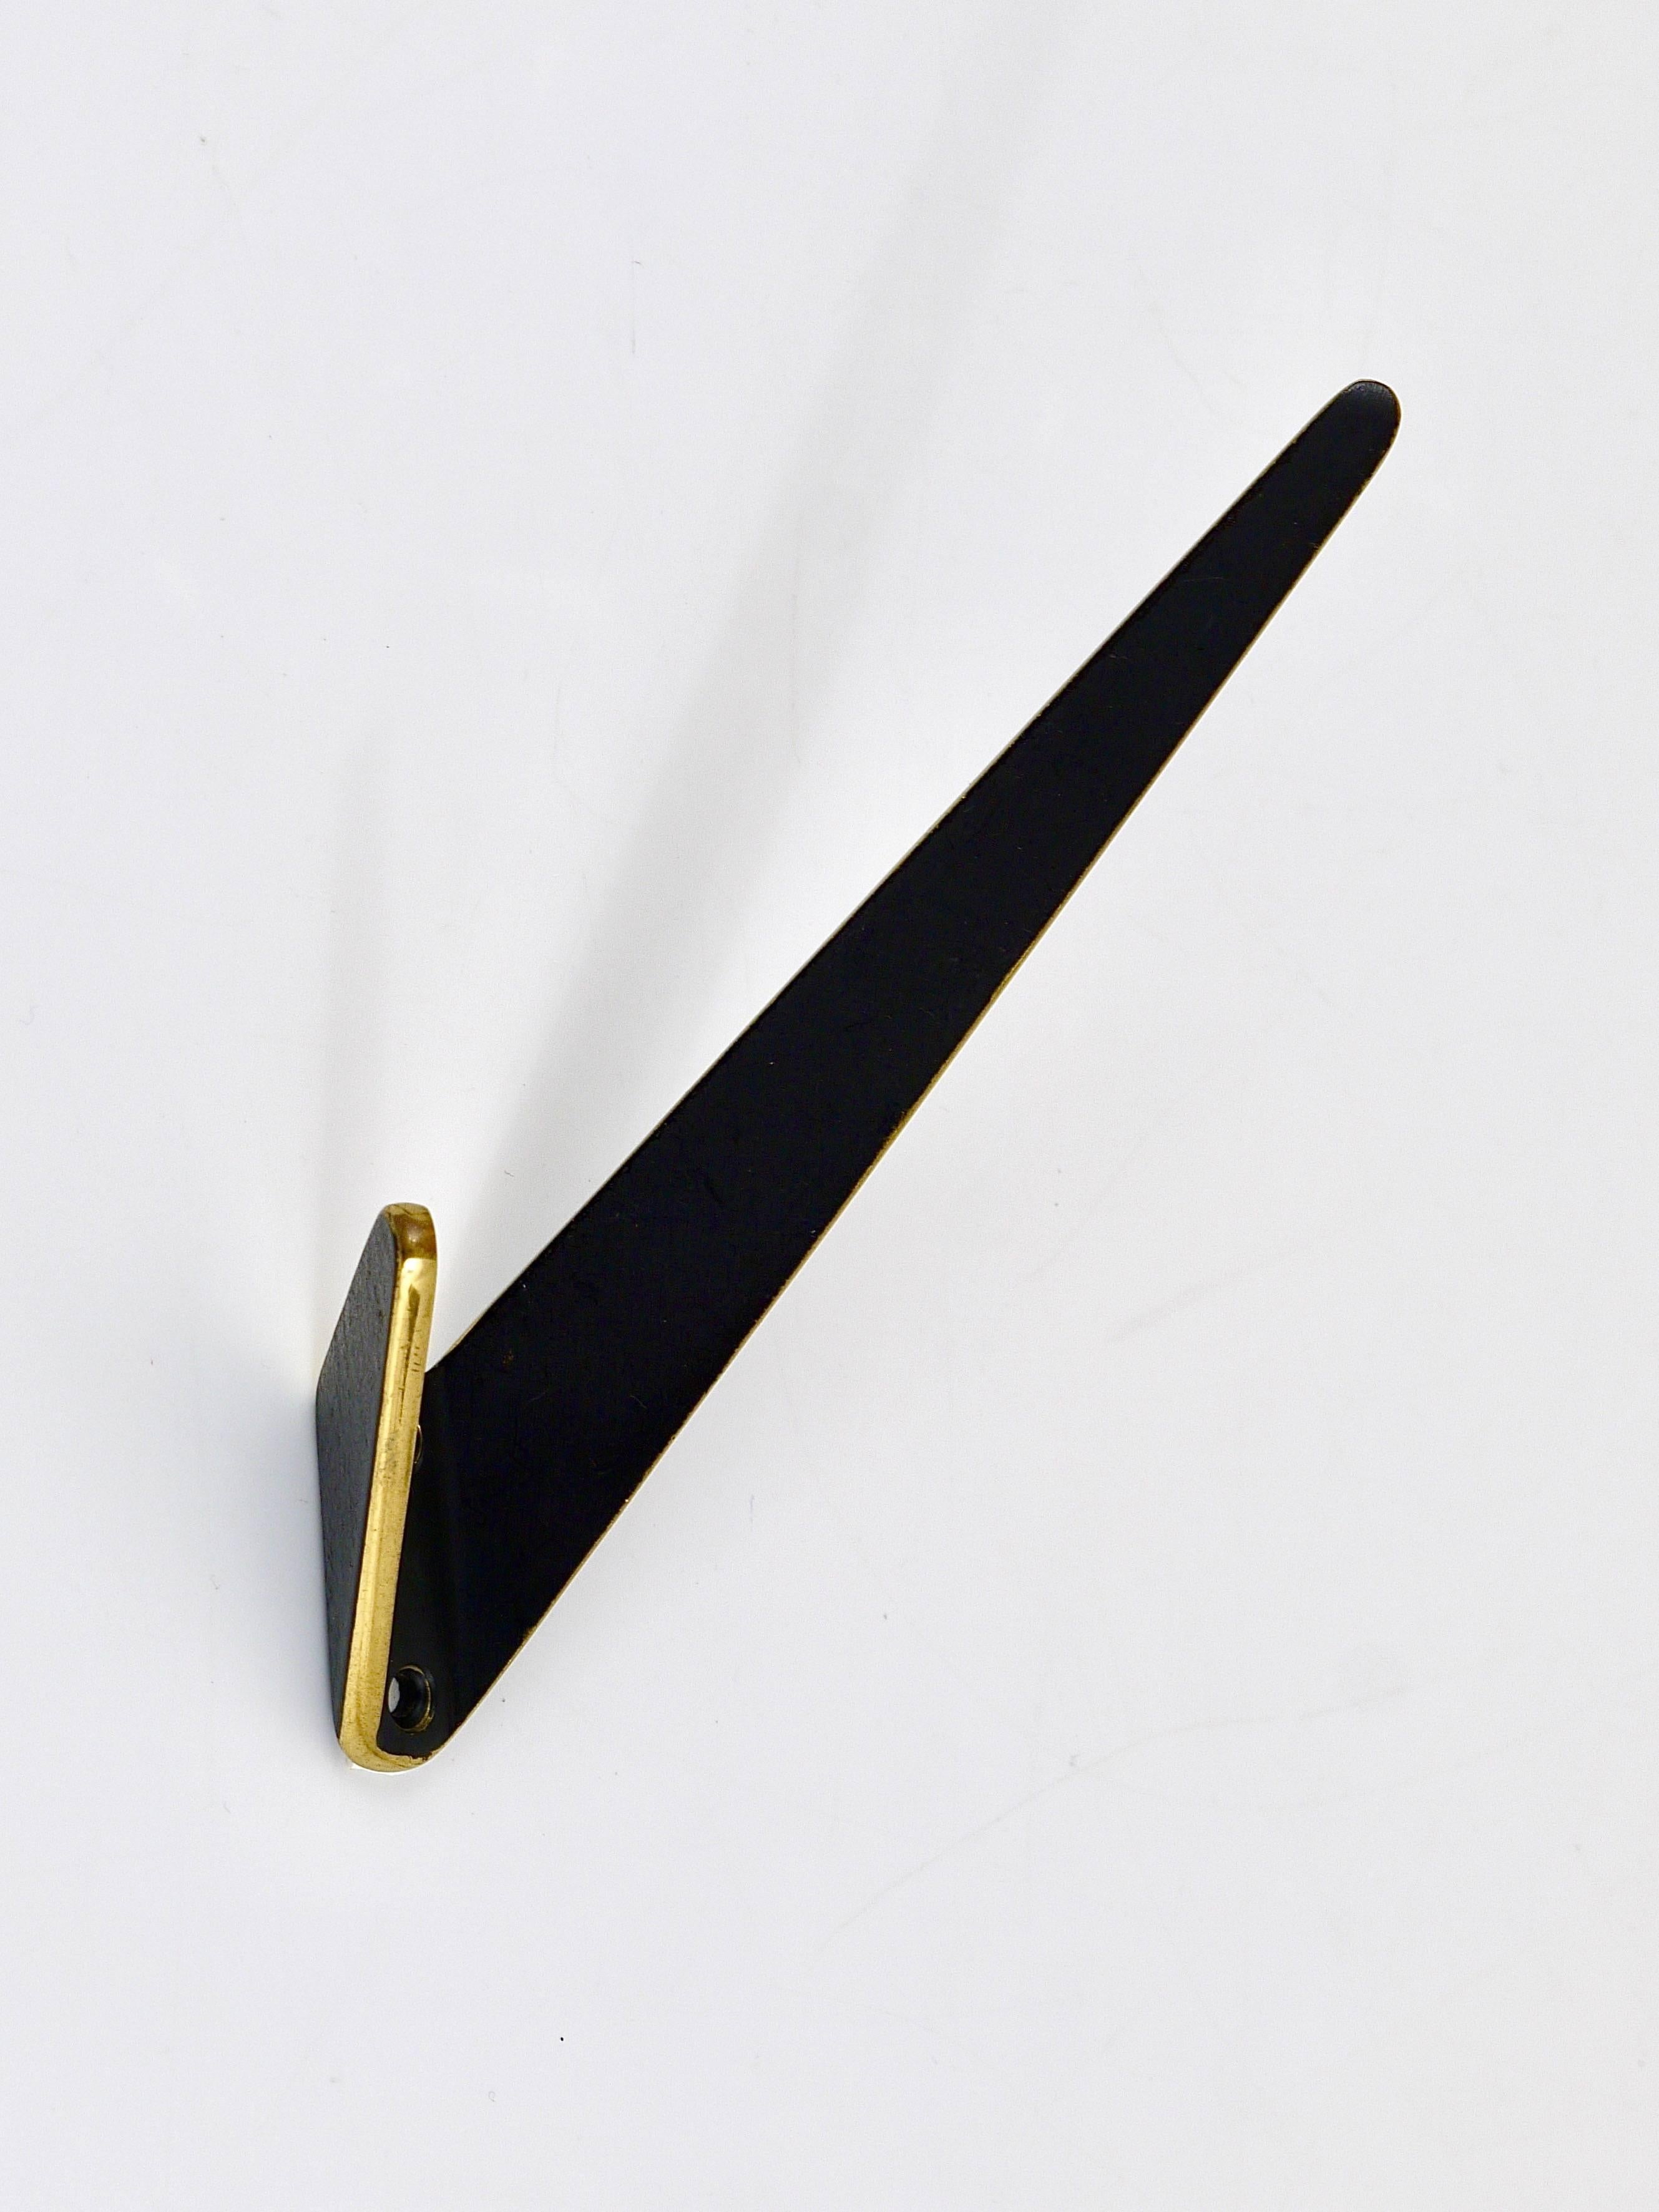 Up to Eight Asymmetrical Midcentury Black Brass Wall Hooks, Austria, 1950s For Sale 2